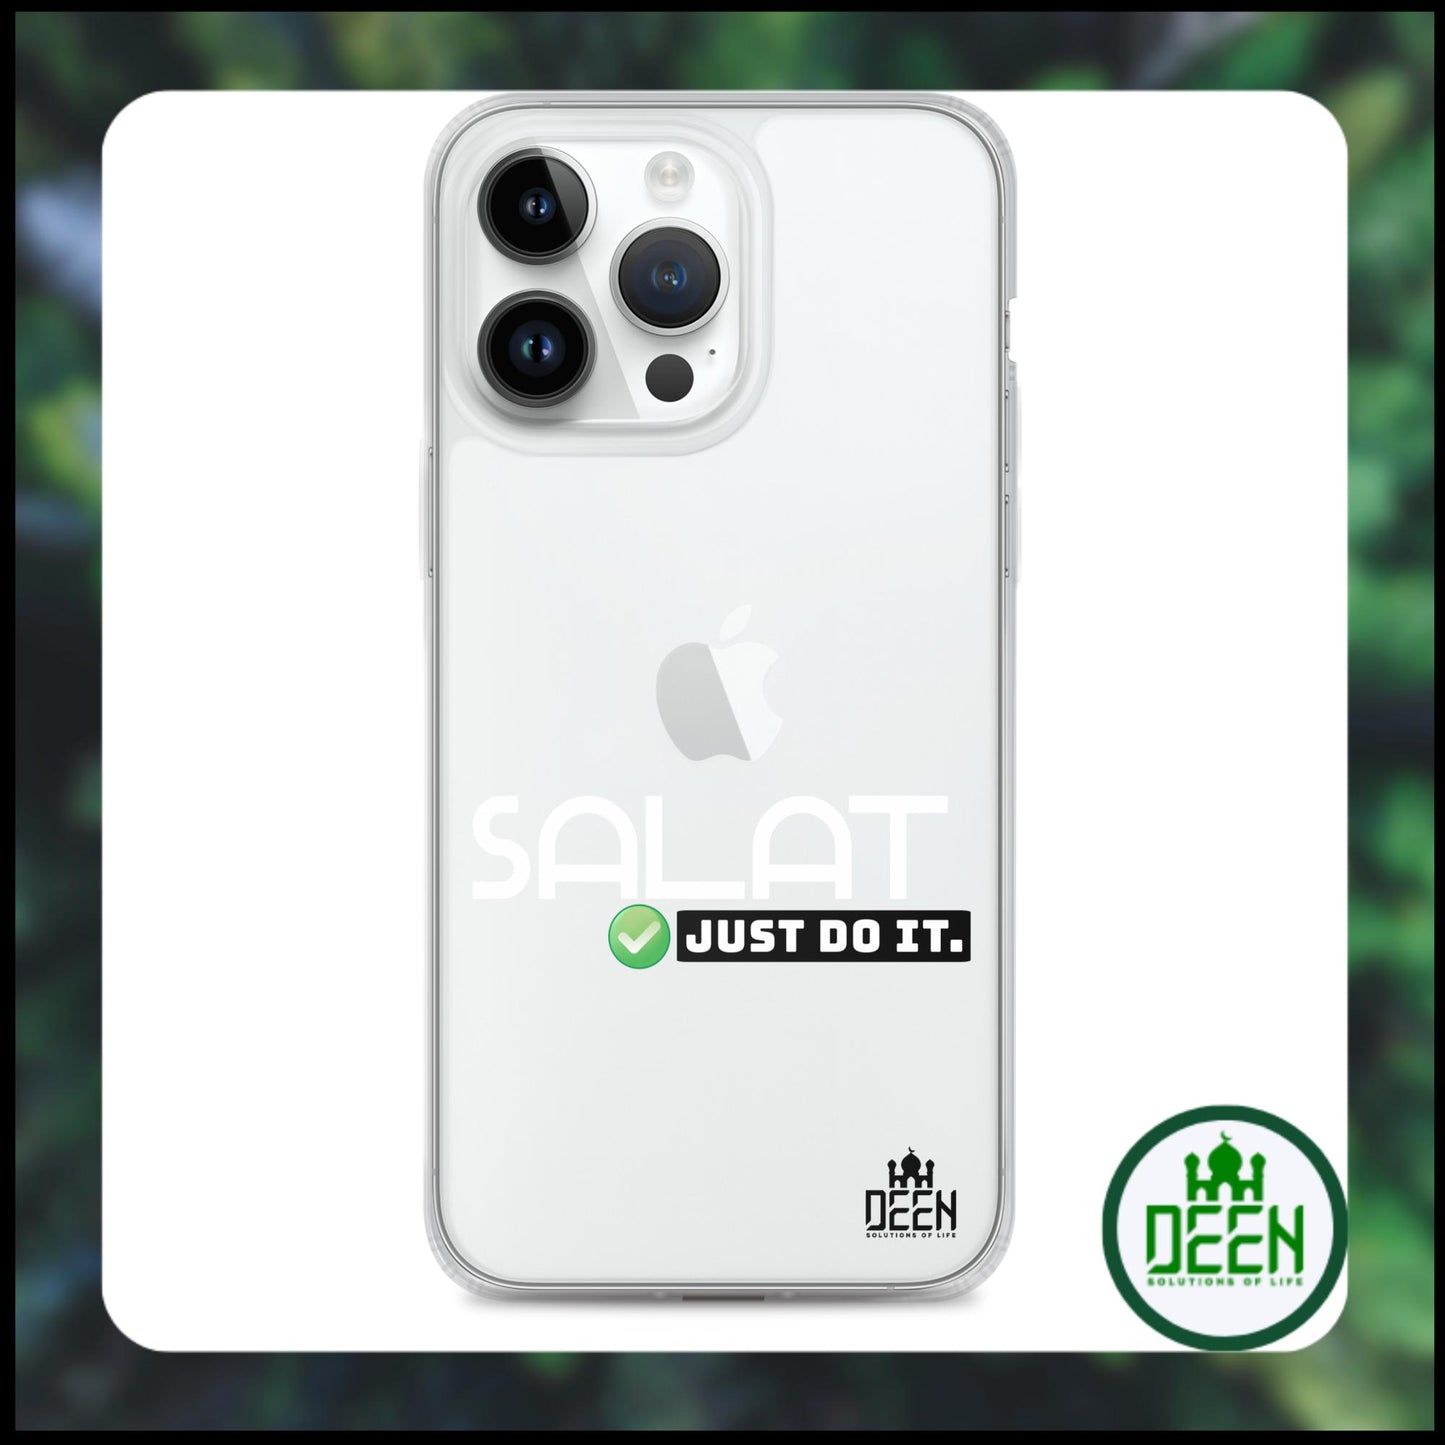 Deen "Salat just do it" Clear Case for iPhone®